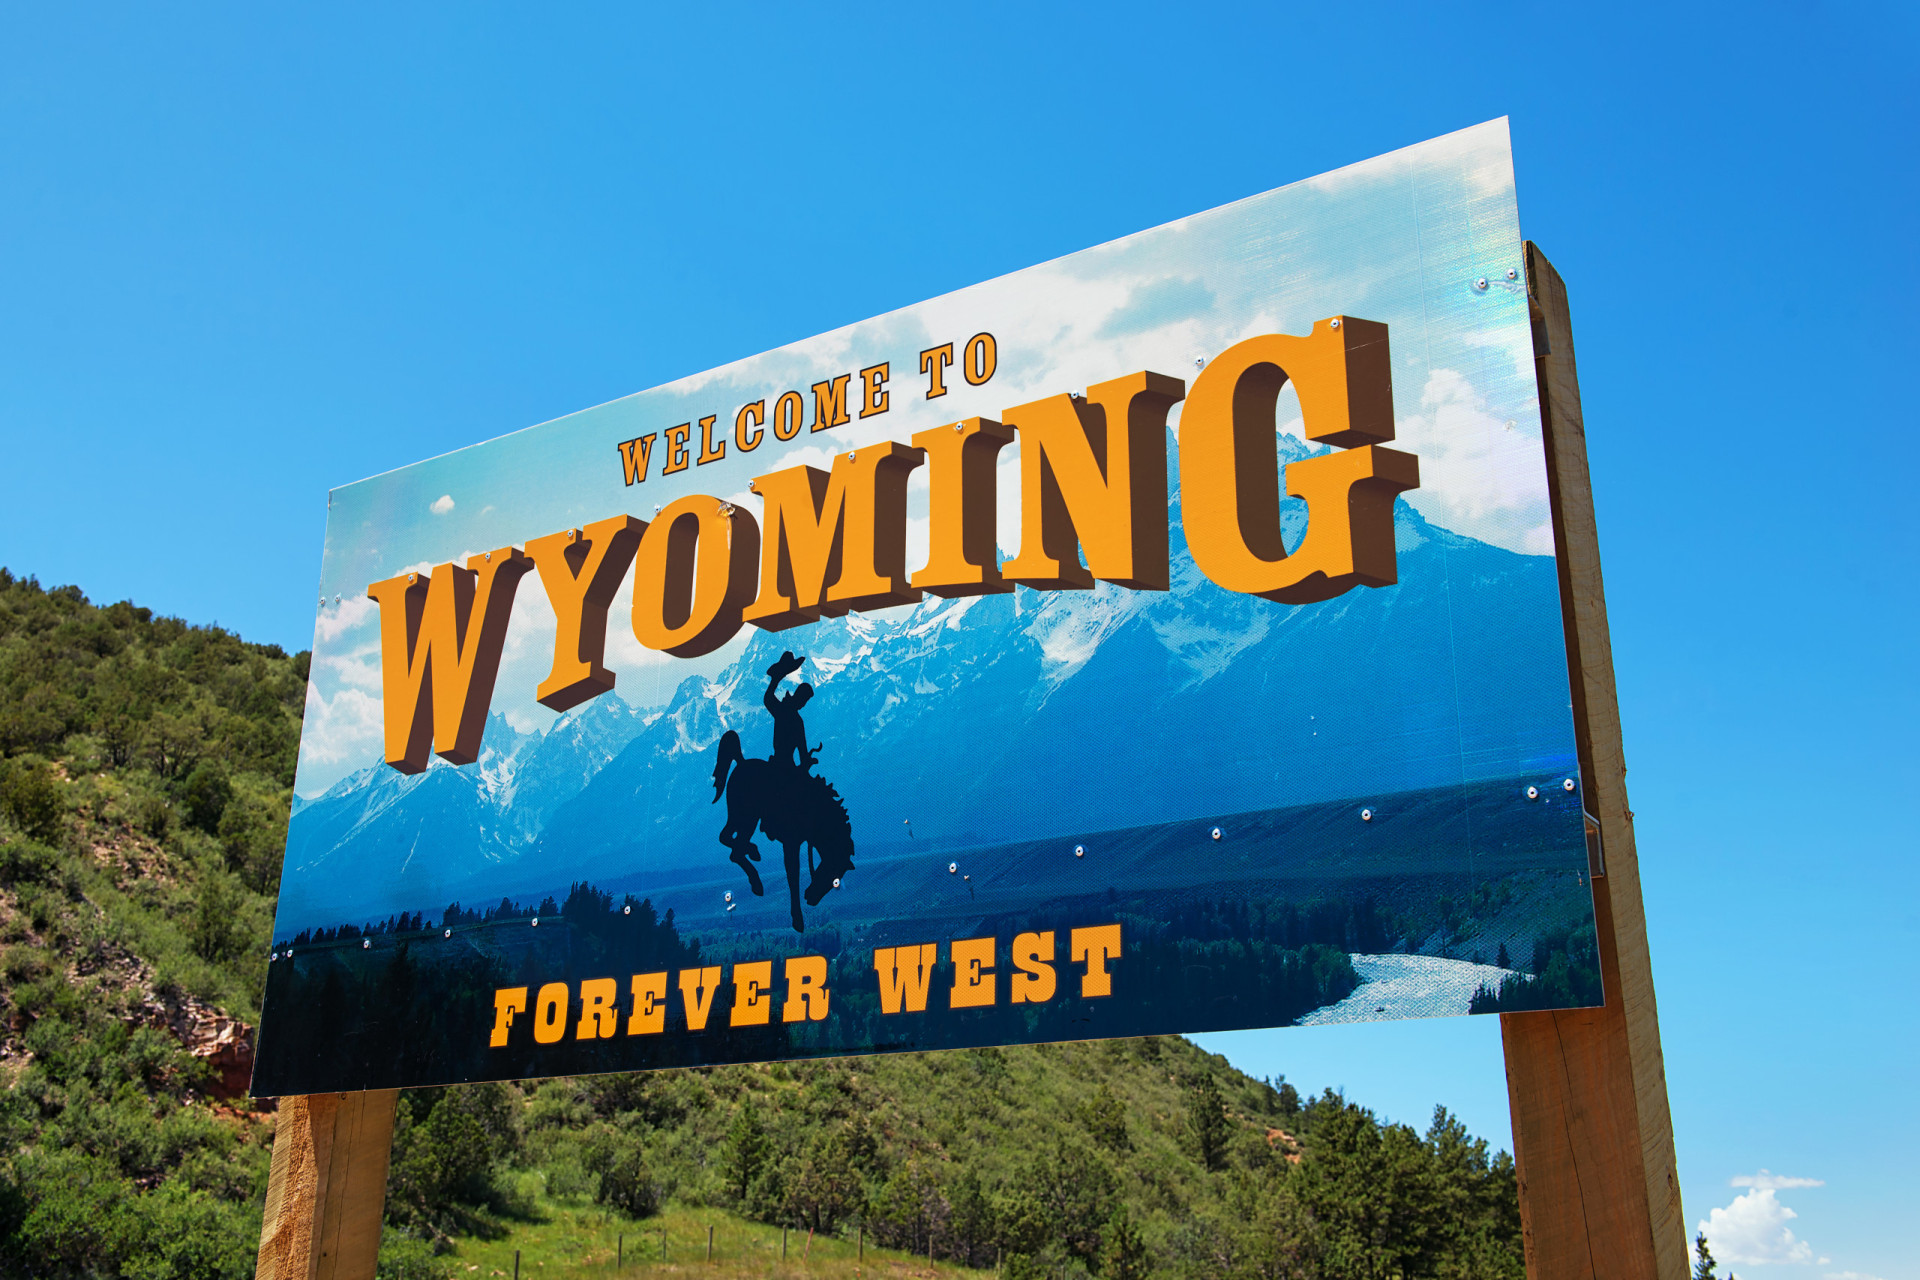 <p>Wyoming's welcome sign includes the slogan "Forever West." Home to Yellowstone National Park, among other attractions, it's easy to see how the untamed wilderness of the state attracts visitors. </p> <p>Sources: (Reader's Digest) (Condé Nast Traveler) (Next Luxury) (New-York Historical Society) </p> <p>See also: <a href="https://www.starsinsider.com/food/552499/the-favorite-comfort-food-of-every-us-state">The favorite comfort food of every US state</a></p>